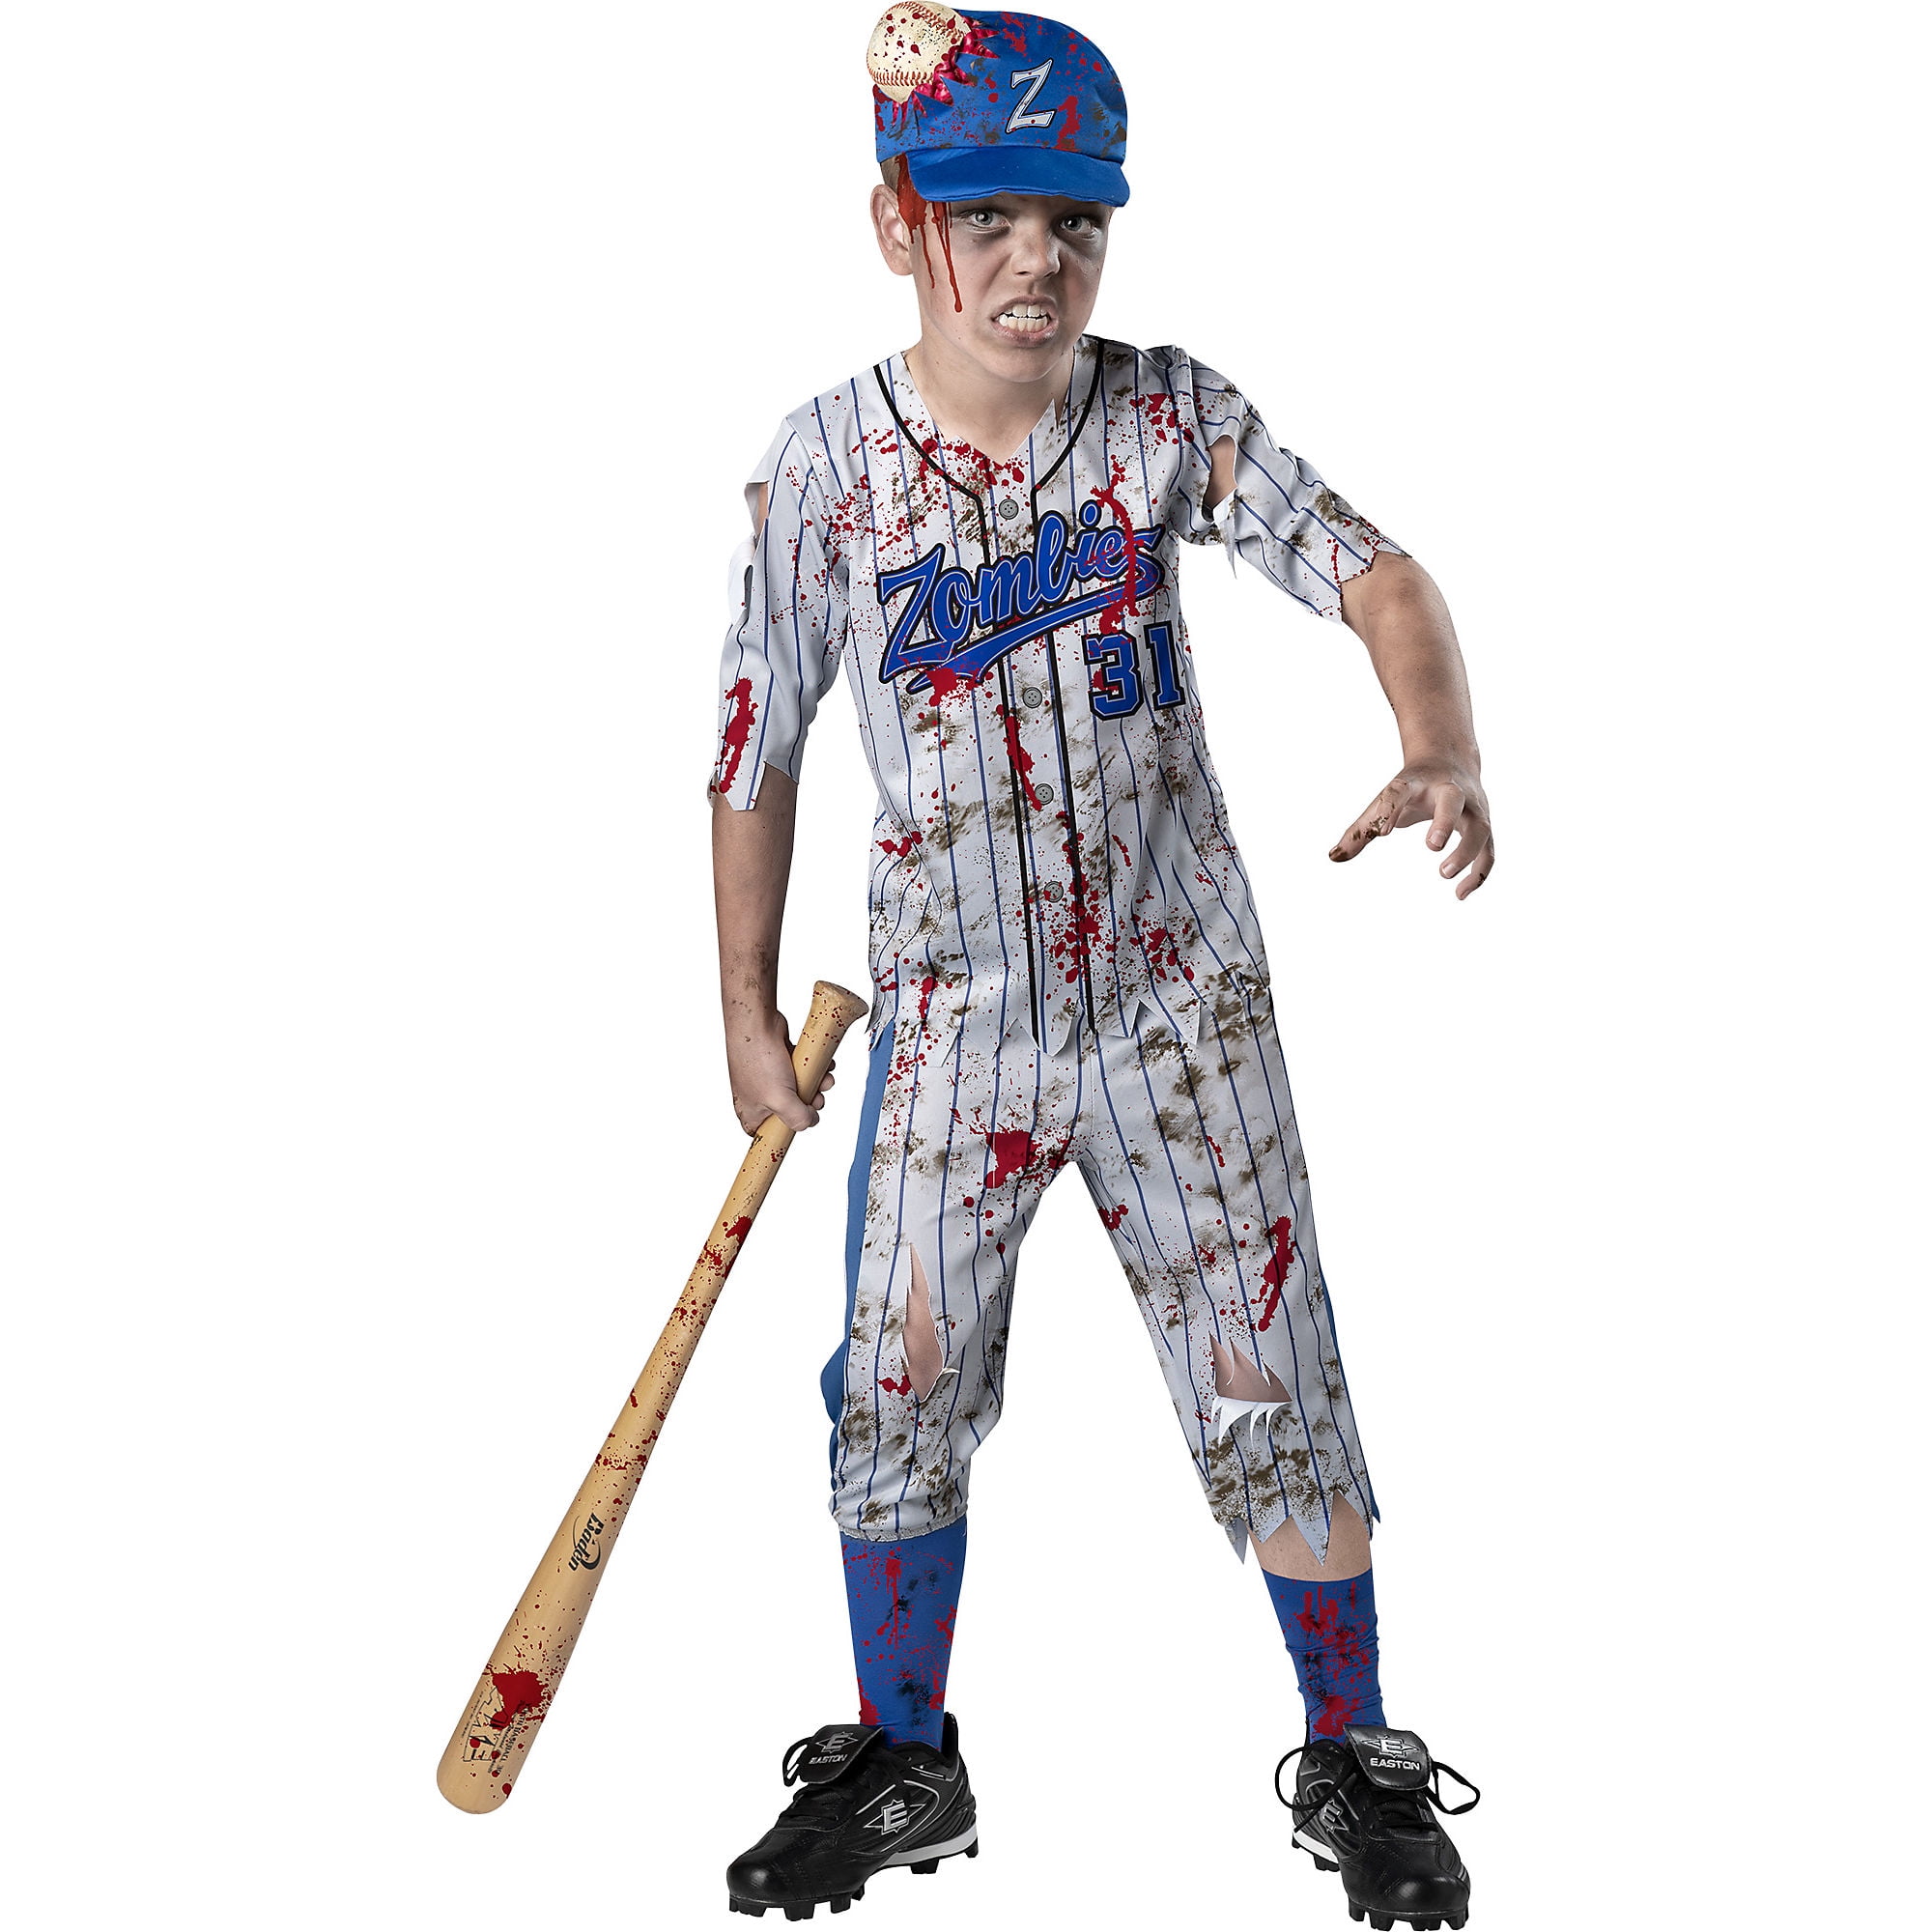 Holiday Times Unlimited Inc Zombie Baseball Player Halloween Costume for Boys, Medium, Includes Accessories